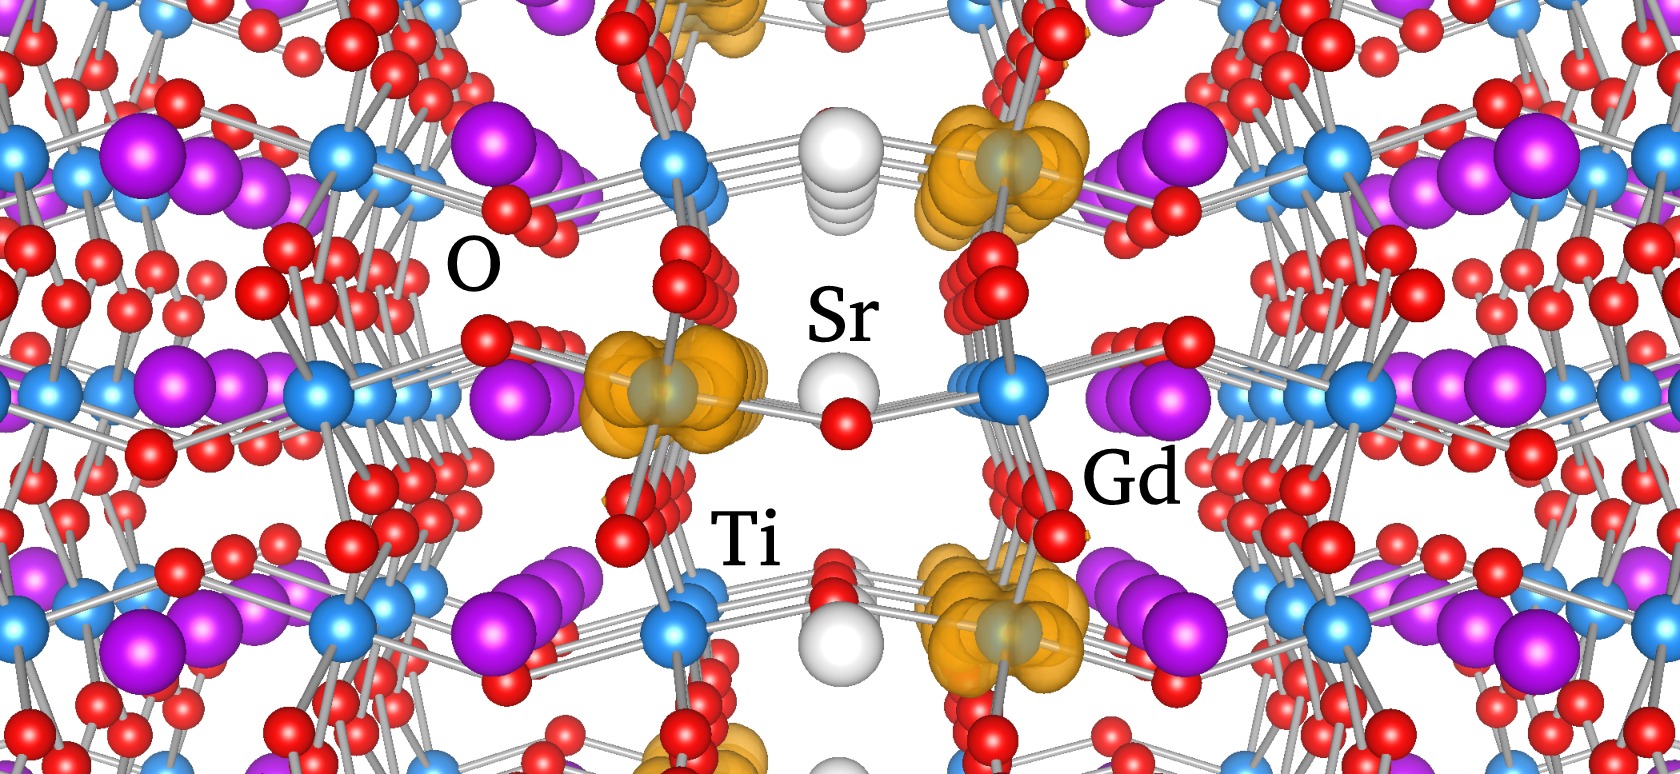 Here, a single layer of SrTiO3 is surrounded by GdTiO3. The interfaces between the two materials create an electron density of ½ electron per Ti, and the electrons localize just as they do in the bulk SrTiO3 shown above.  (Lars Bjaalie)
